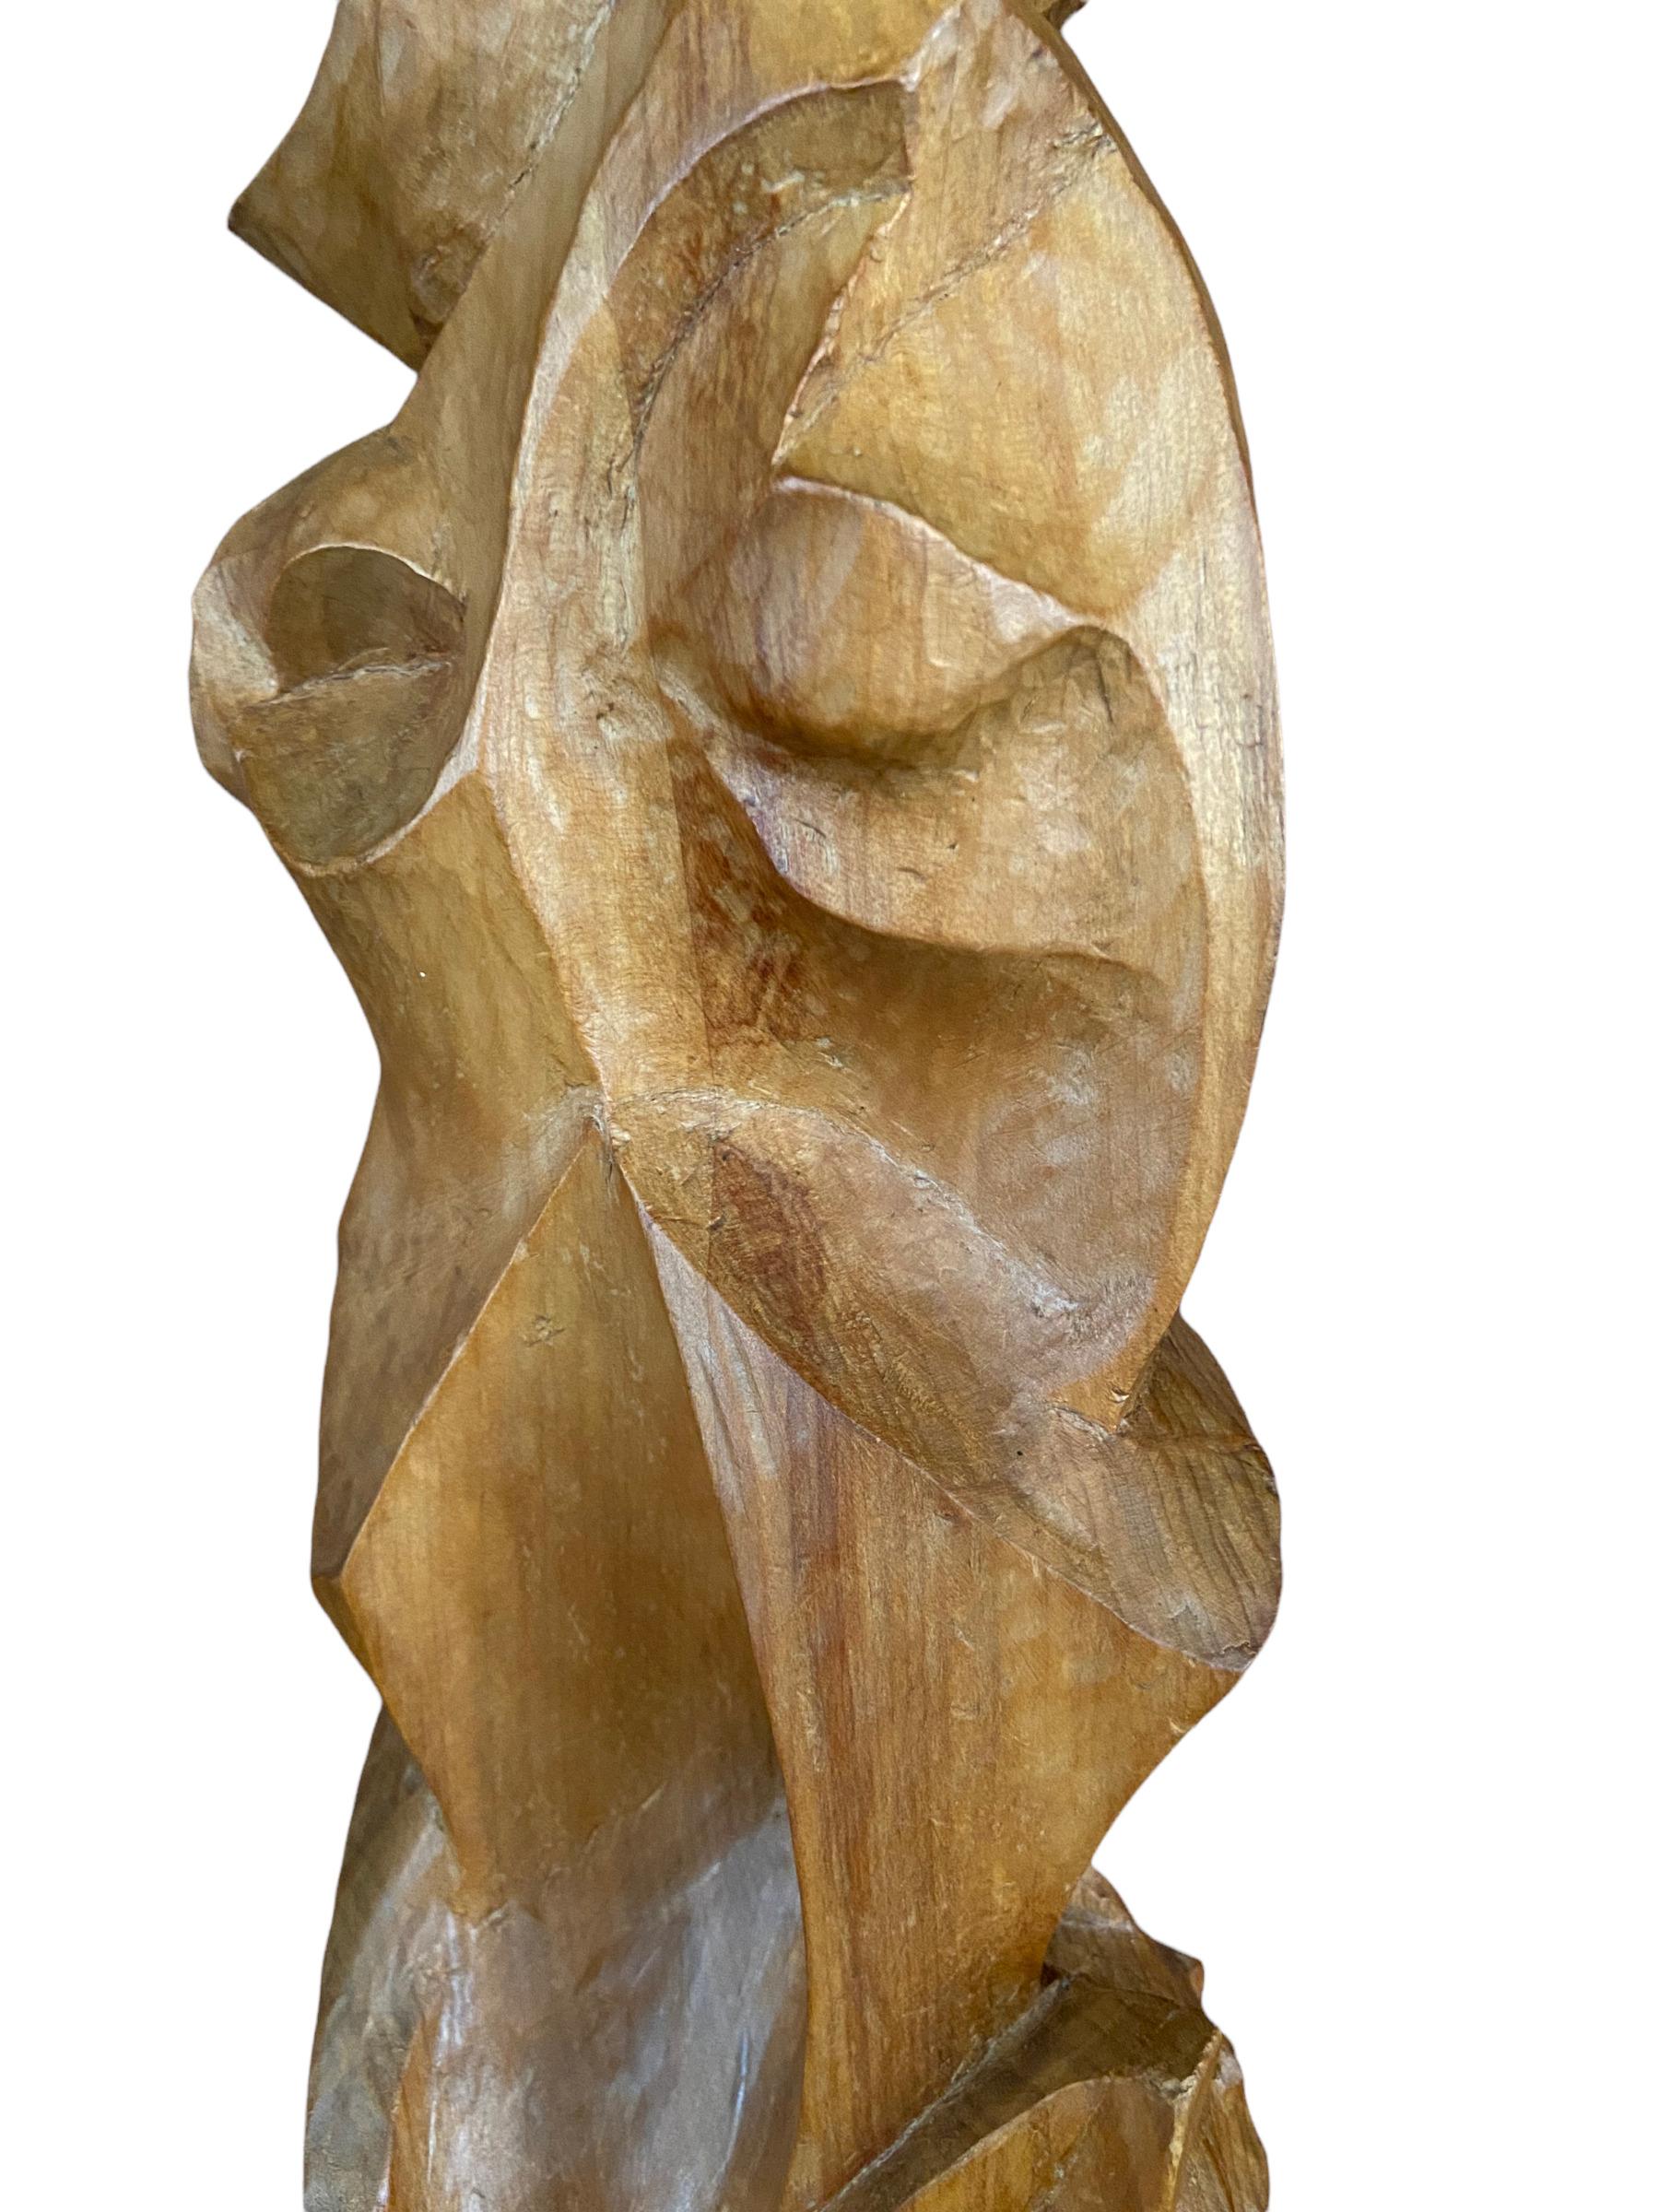 Cubist wooden sculpture made and signed by A. van Heeswijk. Made of Oak in the 1920s in The Netherlands. The artist carved his name in the foot. This piece of art is in a very good condition.